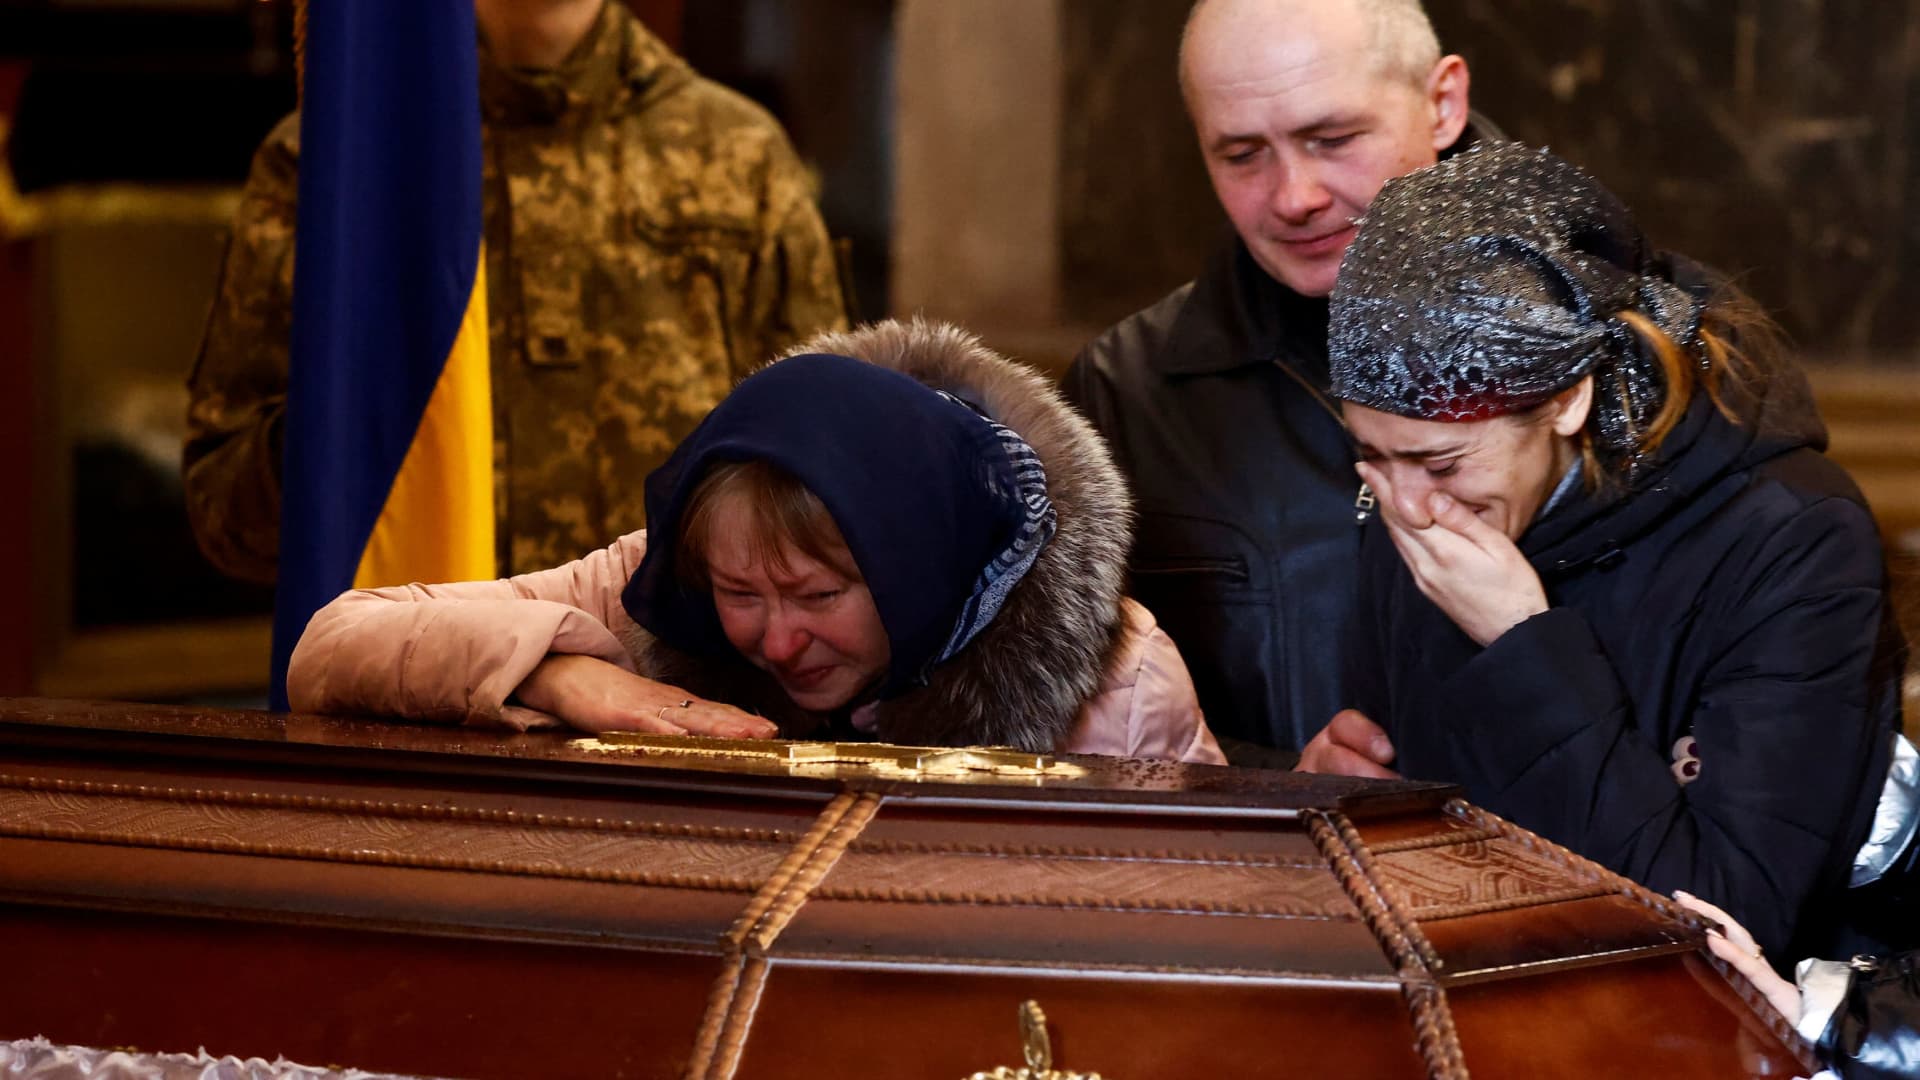 Olena, mother of Denys Snihur, 25, a border guard-turned-soldier, killed by Russian shelling in the northern town of Ovruch, and her daughter-in-law Carina mourn by his coffin during the memorial service at Saints Peter and Paul Garrison Church, in Lviv, Ukraine, March 21, 2022.